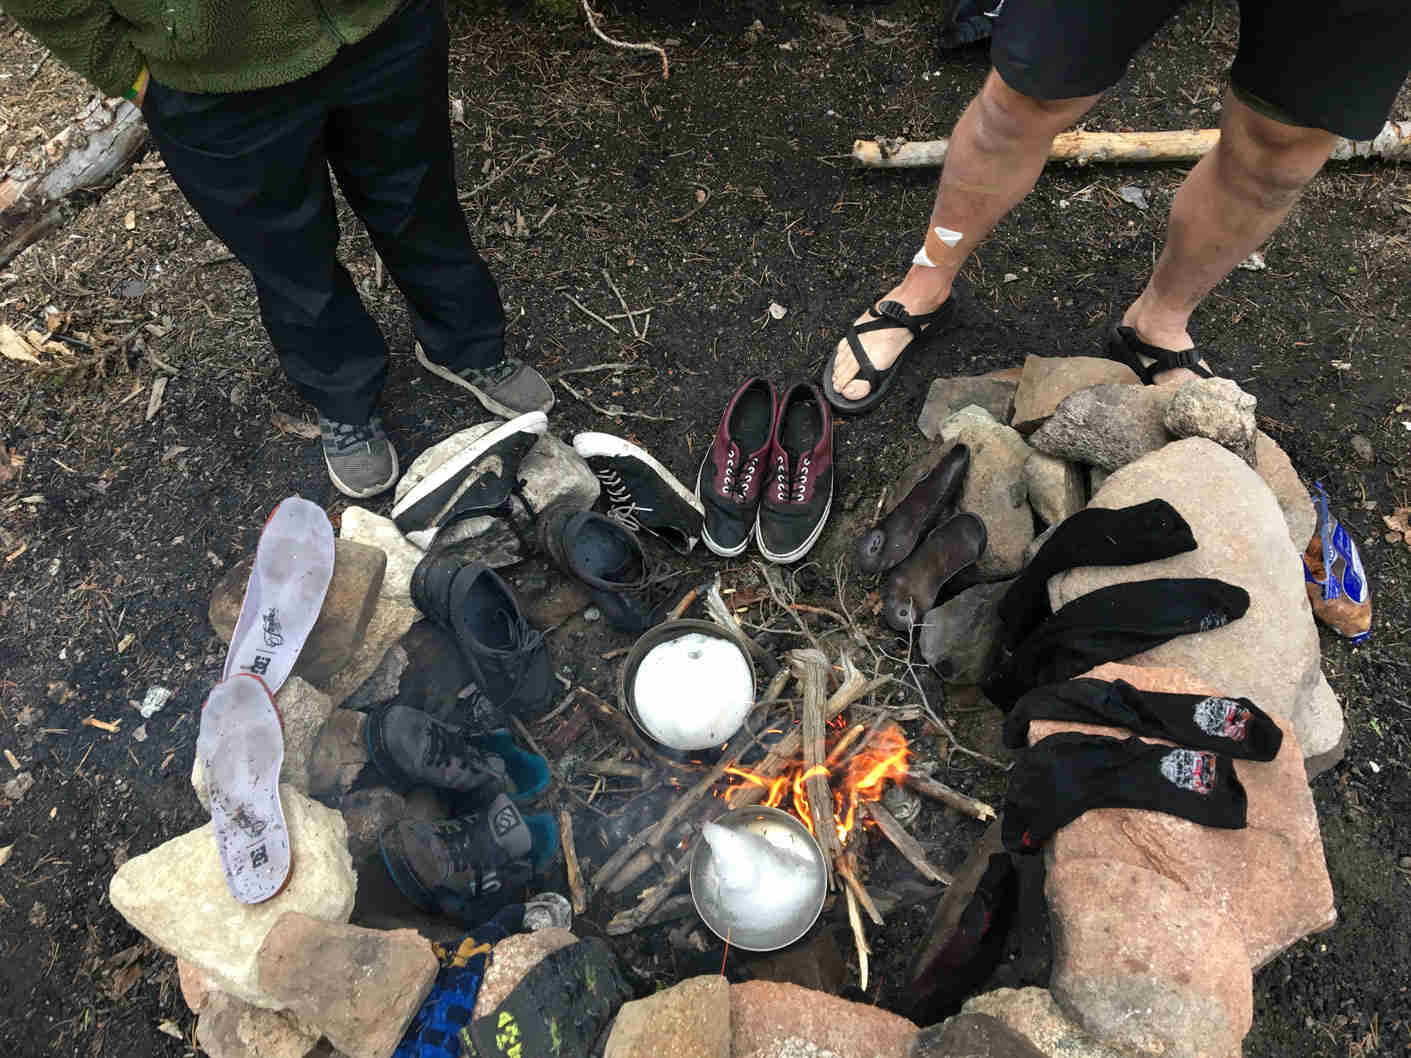 Downward view of shoes and socks on the rocks around a campfire